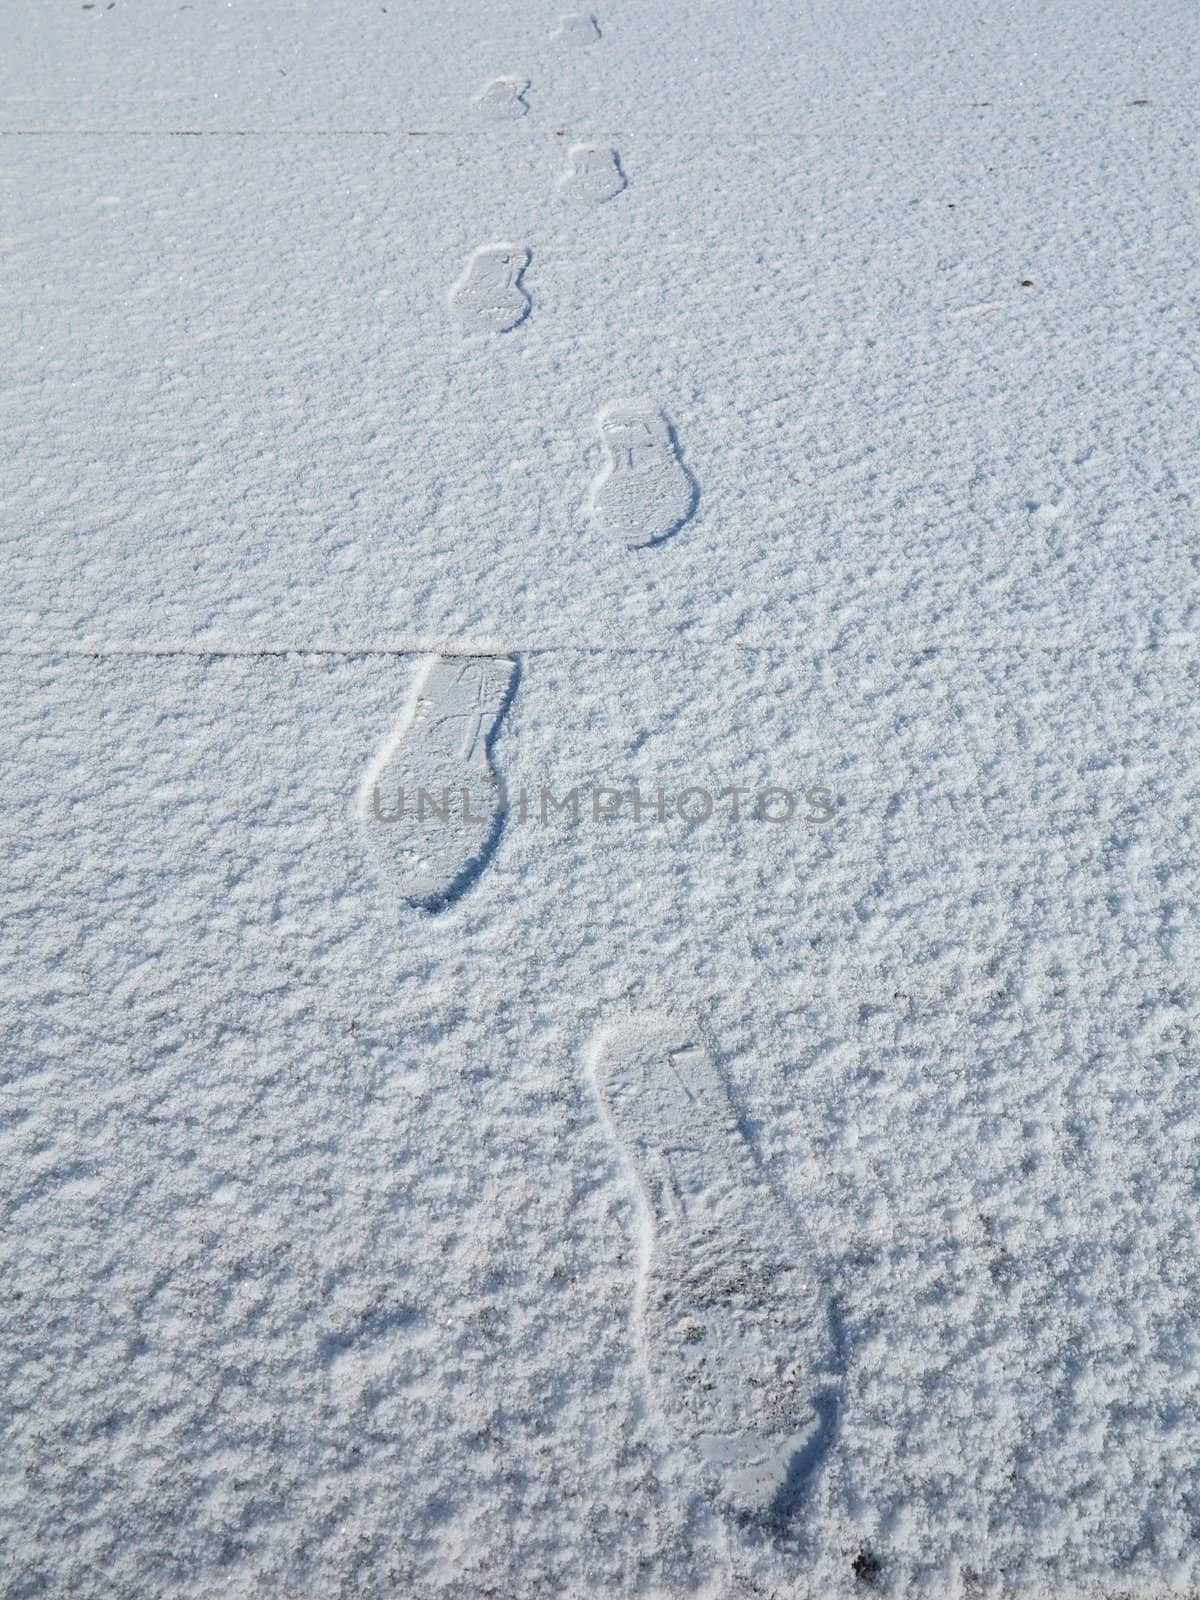 Hot footsteps on cold snow